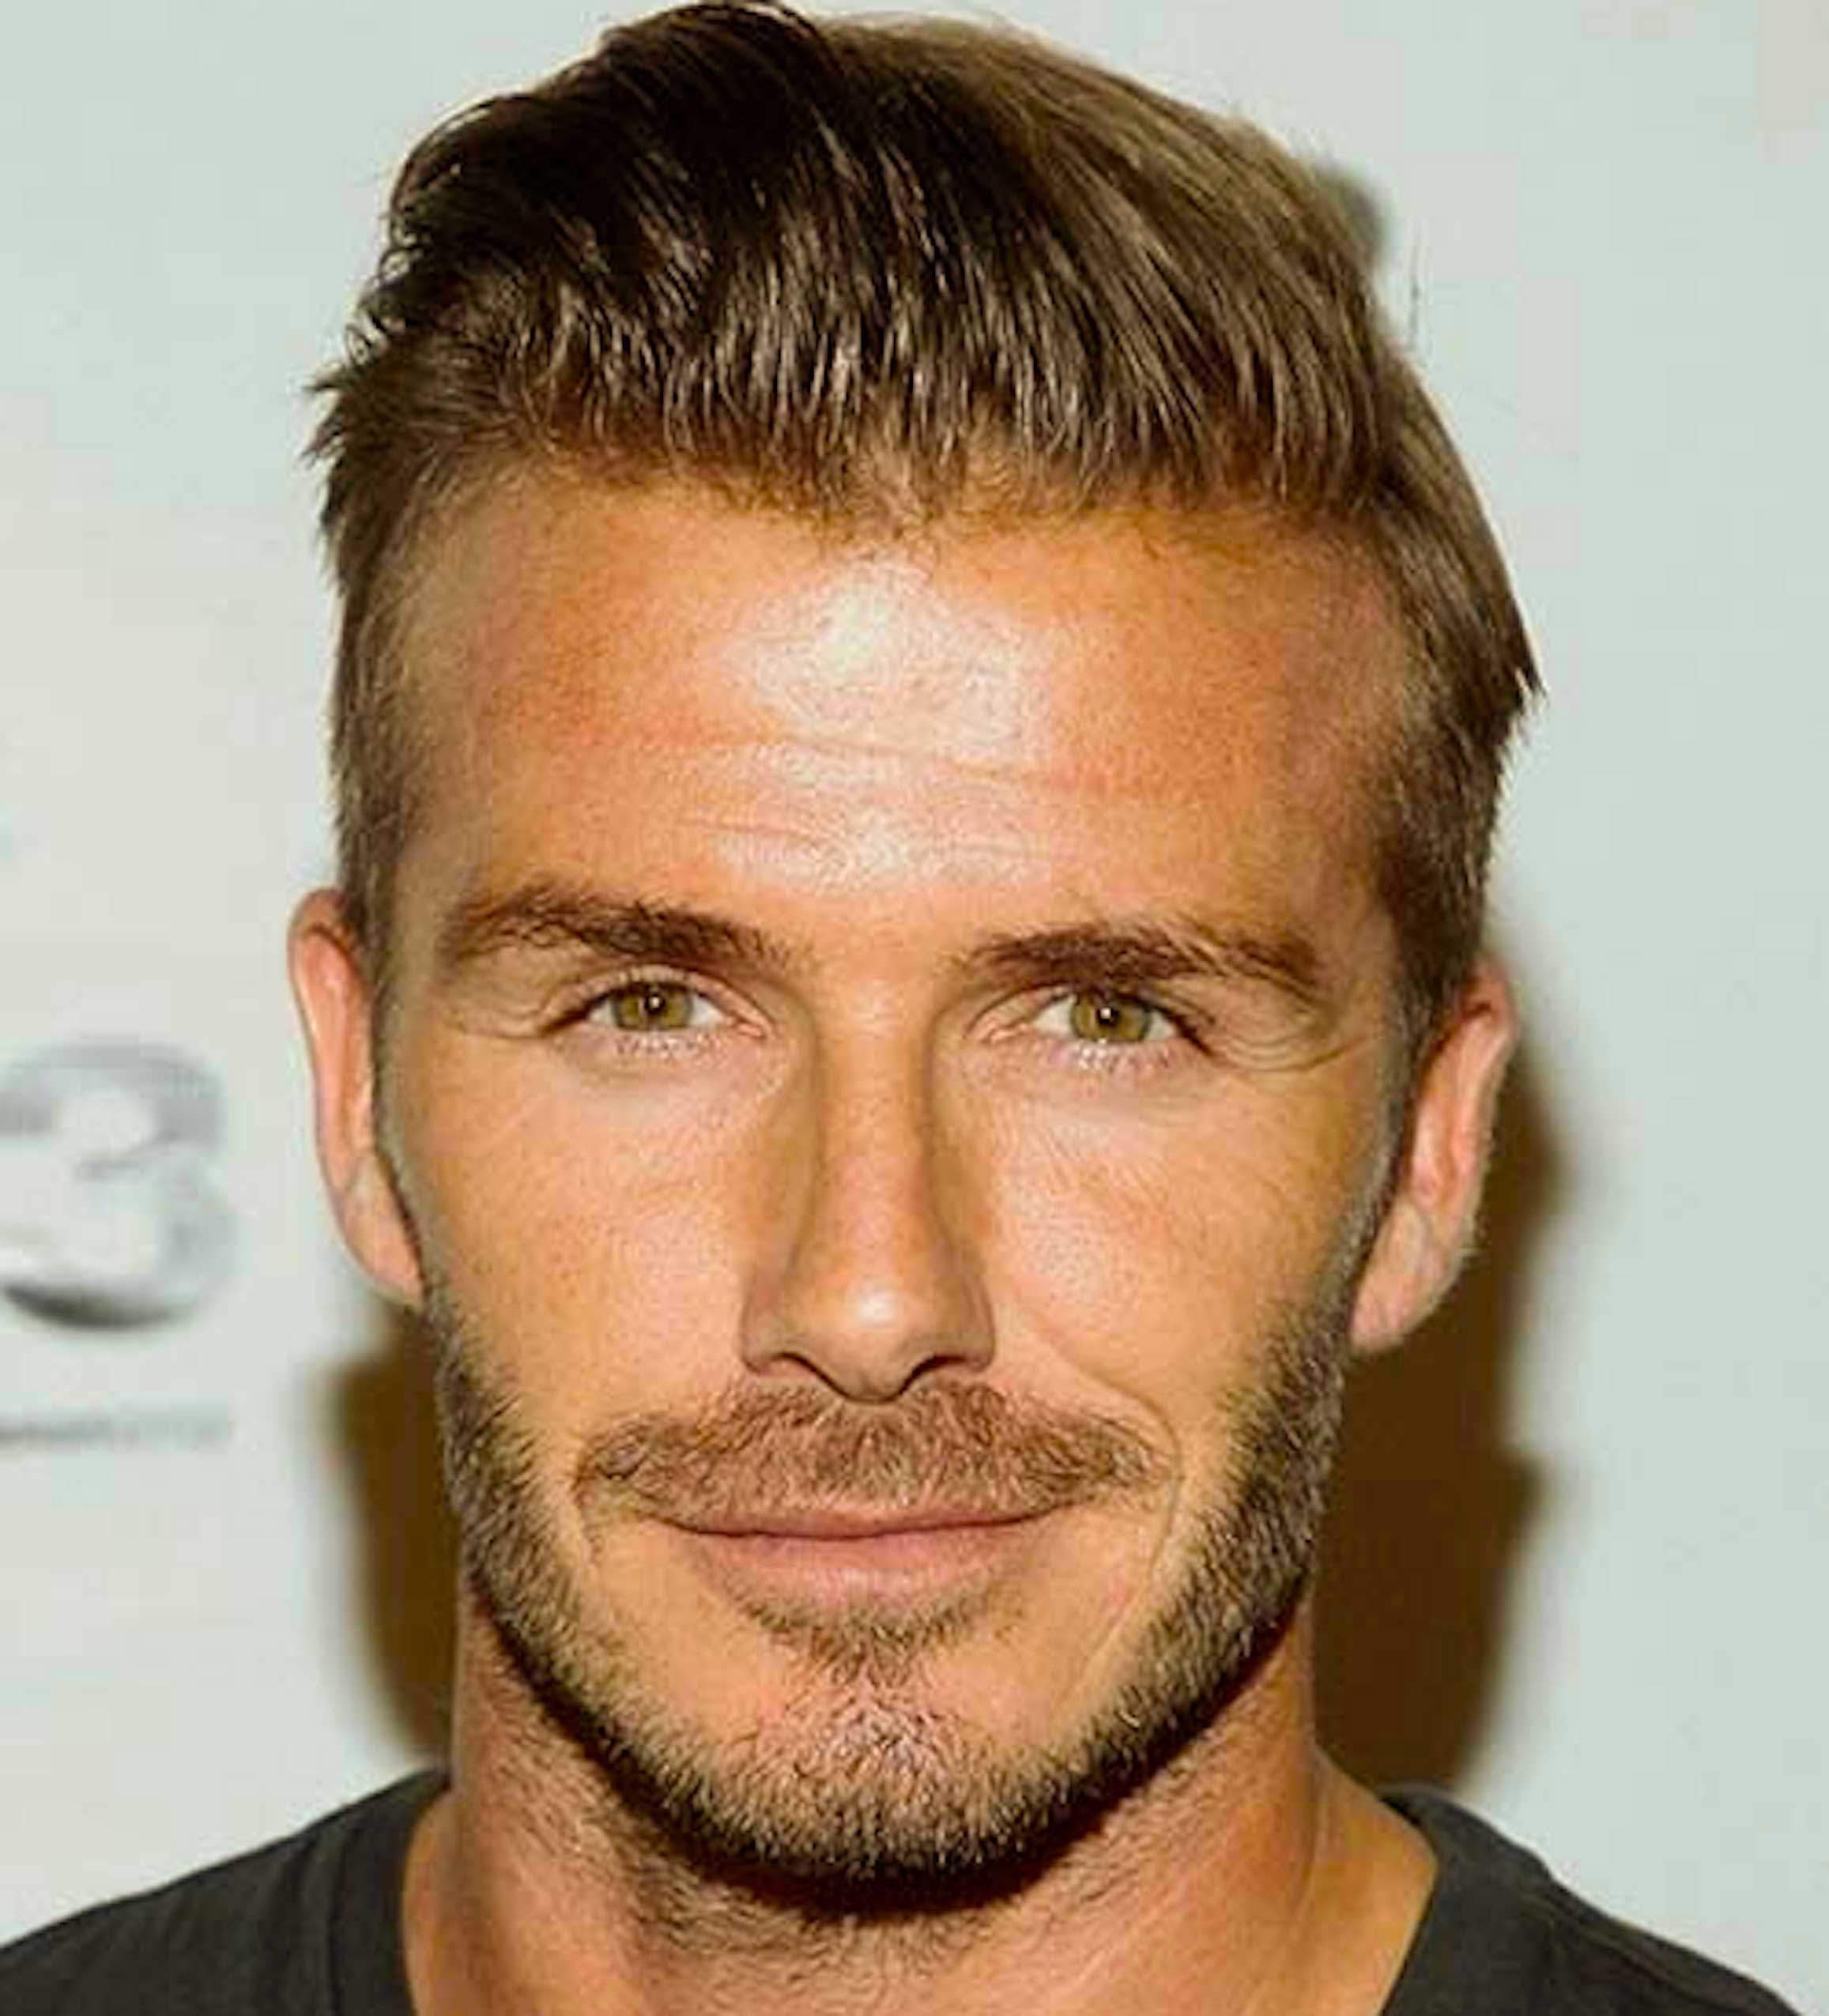 FITNESS SNACKING: A SURPRISINGLY SIMPLE WAY DAVID BECKHAM MAINTAINS HIS TOP SHAPE